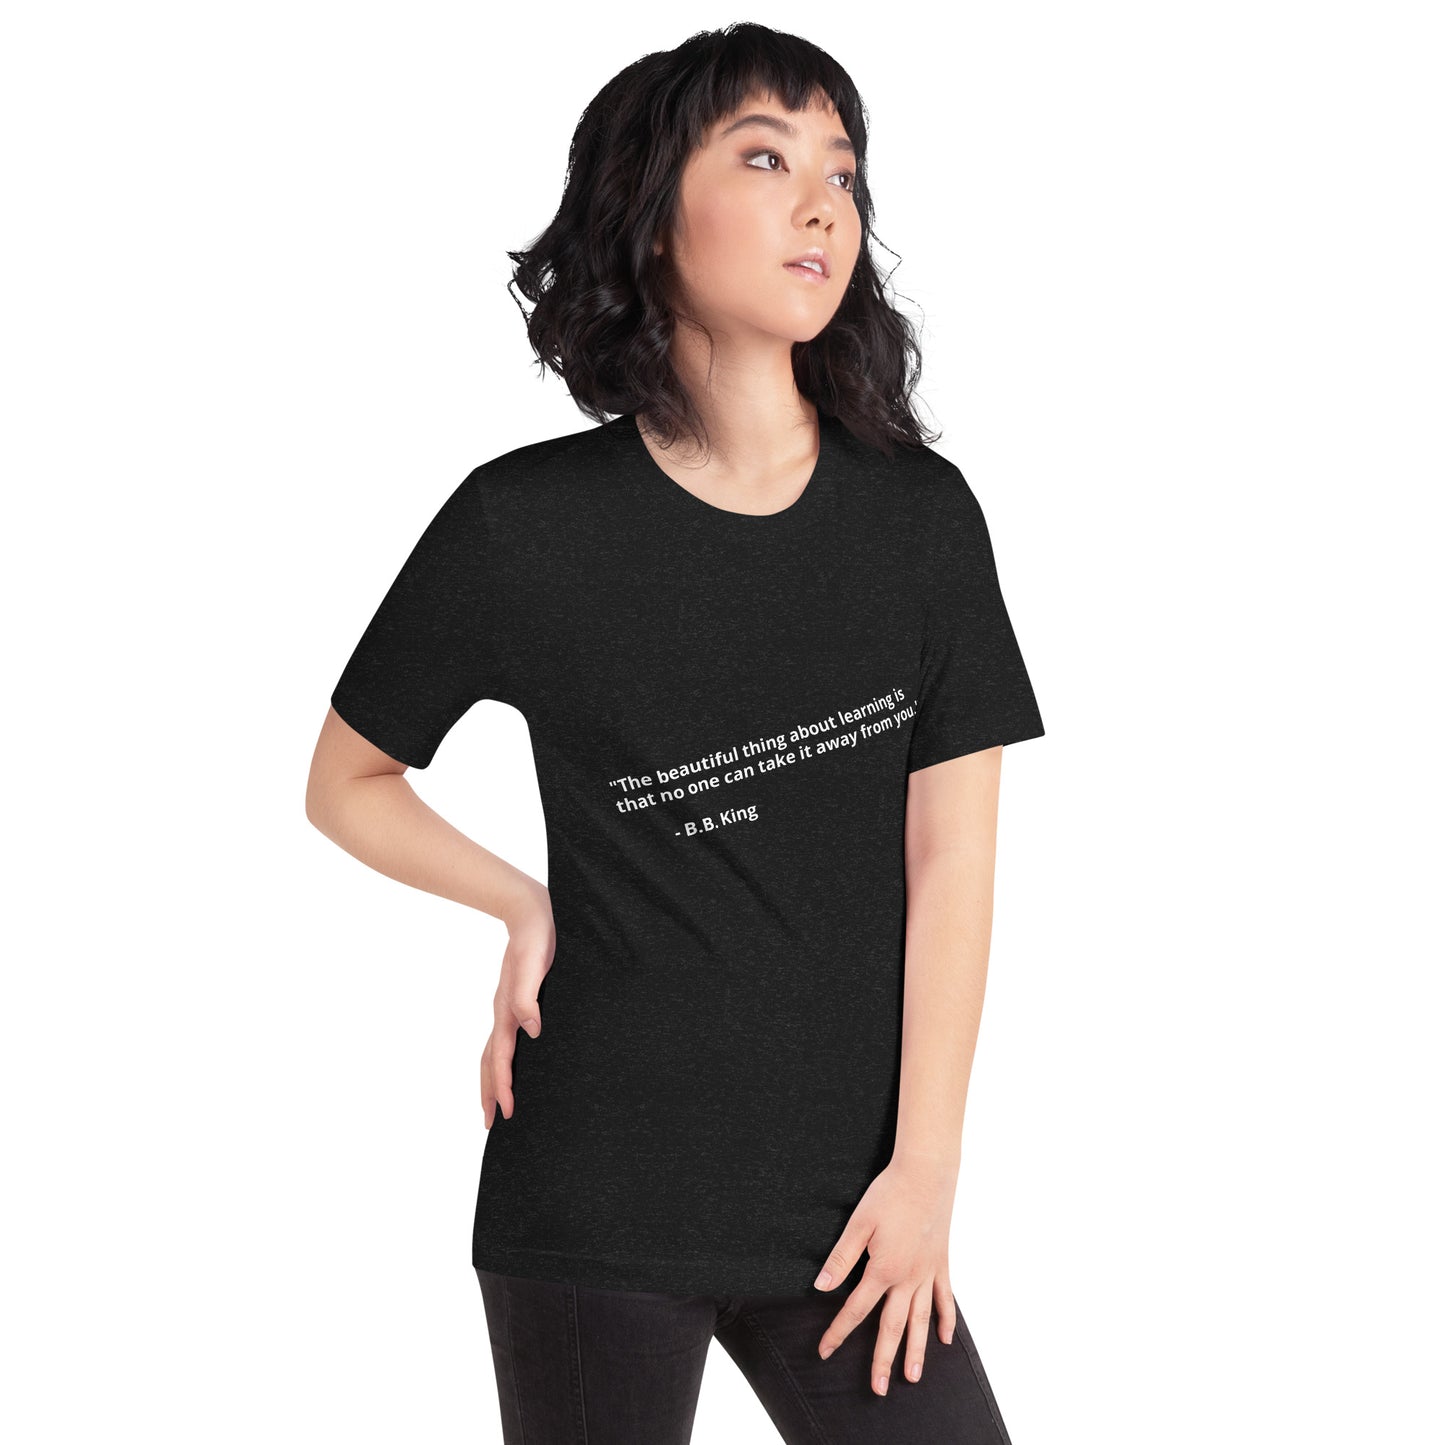 "The beautiful thing about learning is that no one can take it away from you." - B.B. King - Unisex t-shirt